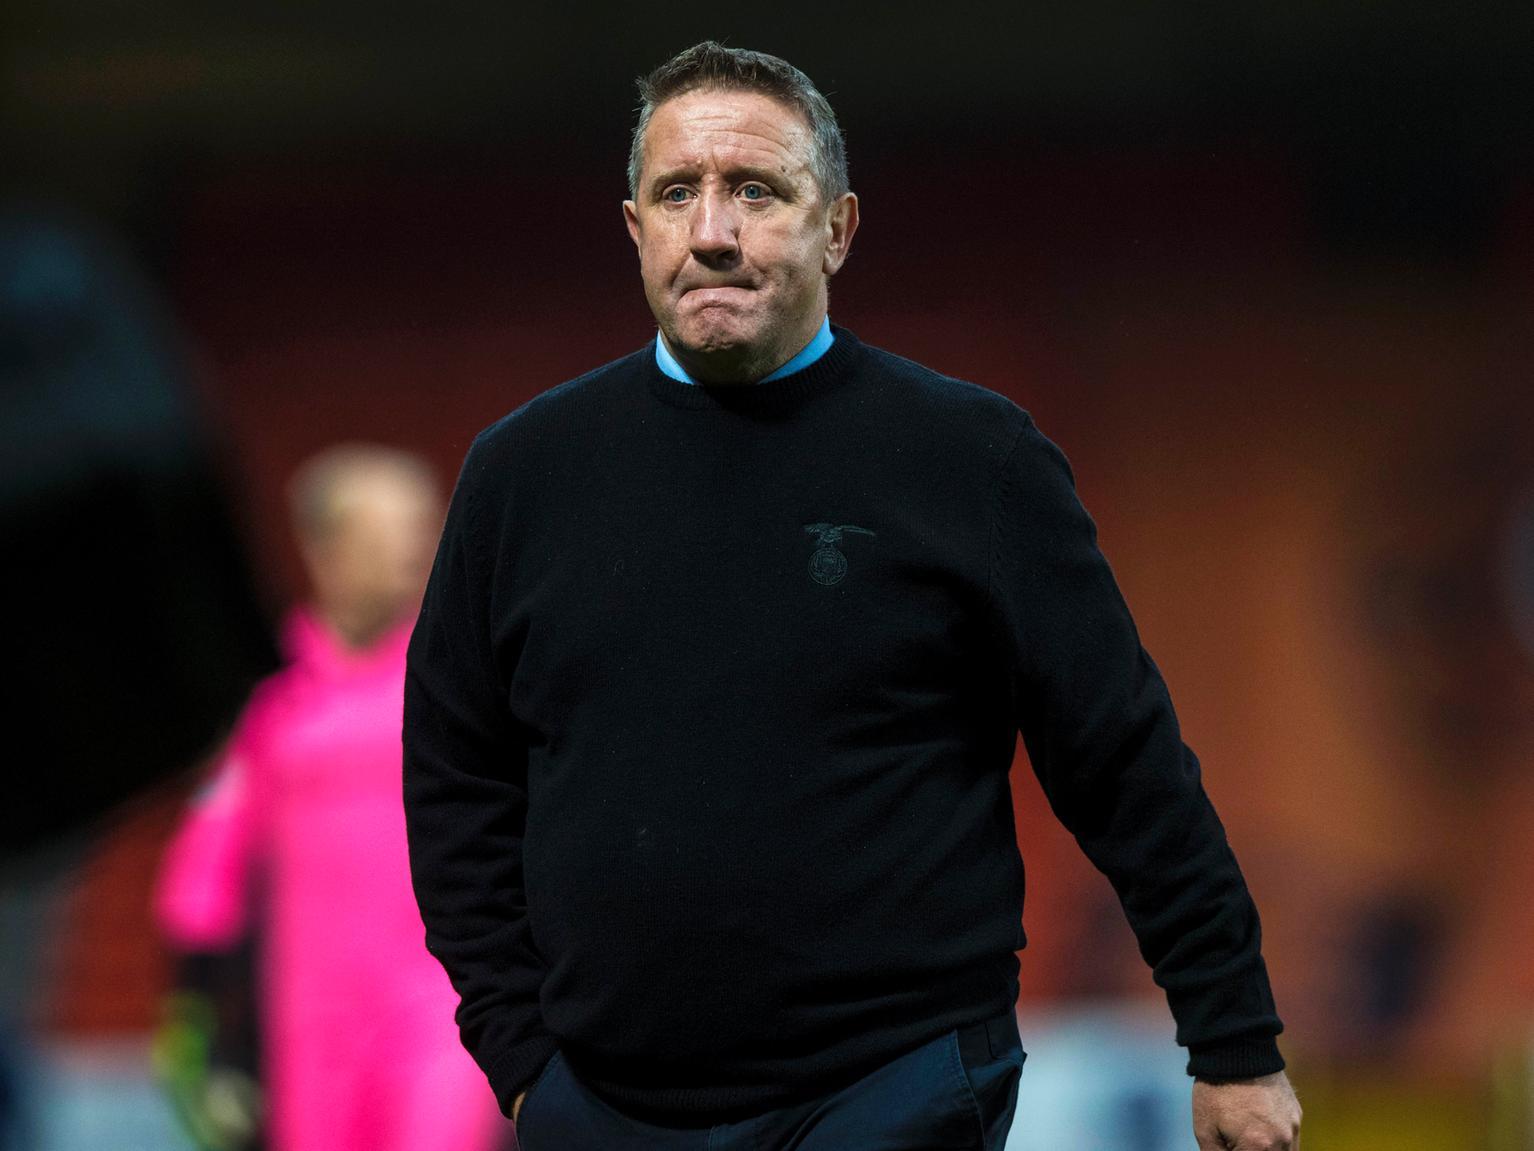 7/1. A Hearts legend. He has been manager once before and has been impressing with Inverness Caledonian Thistle.